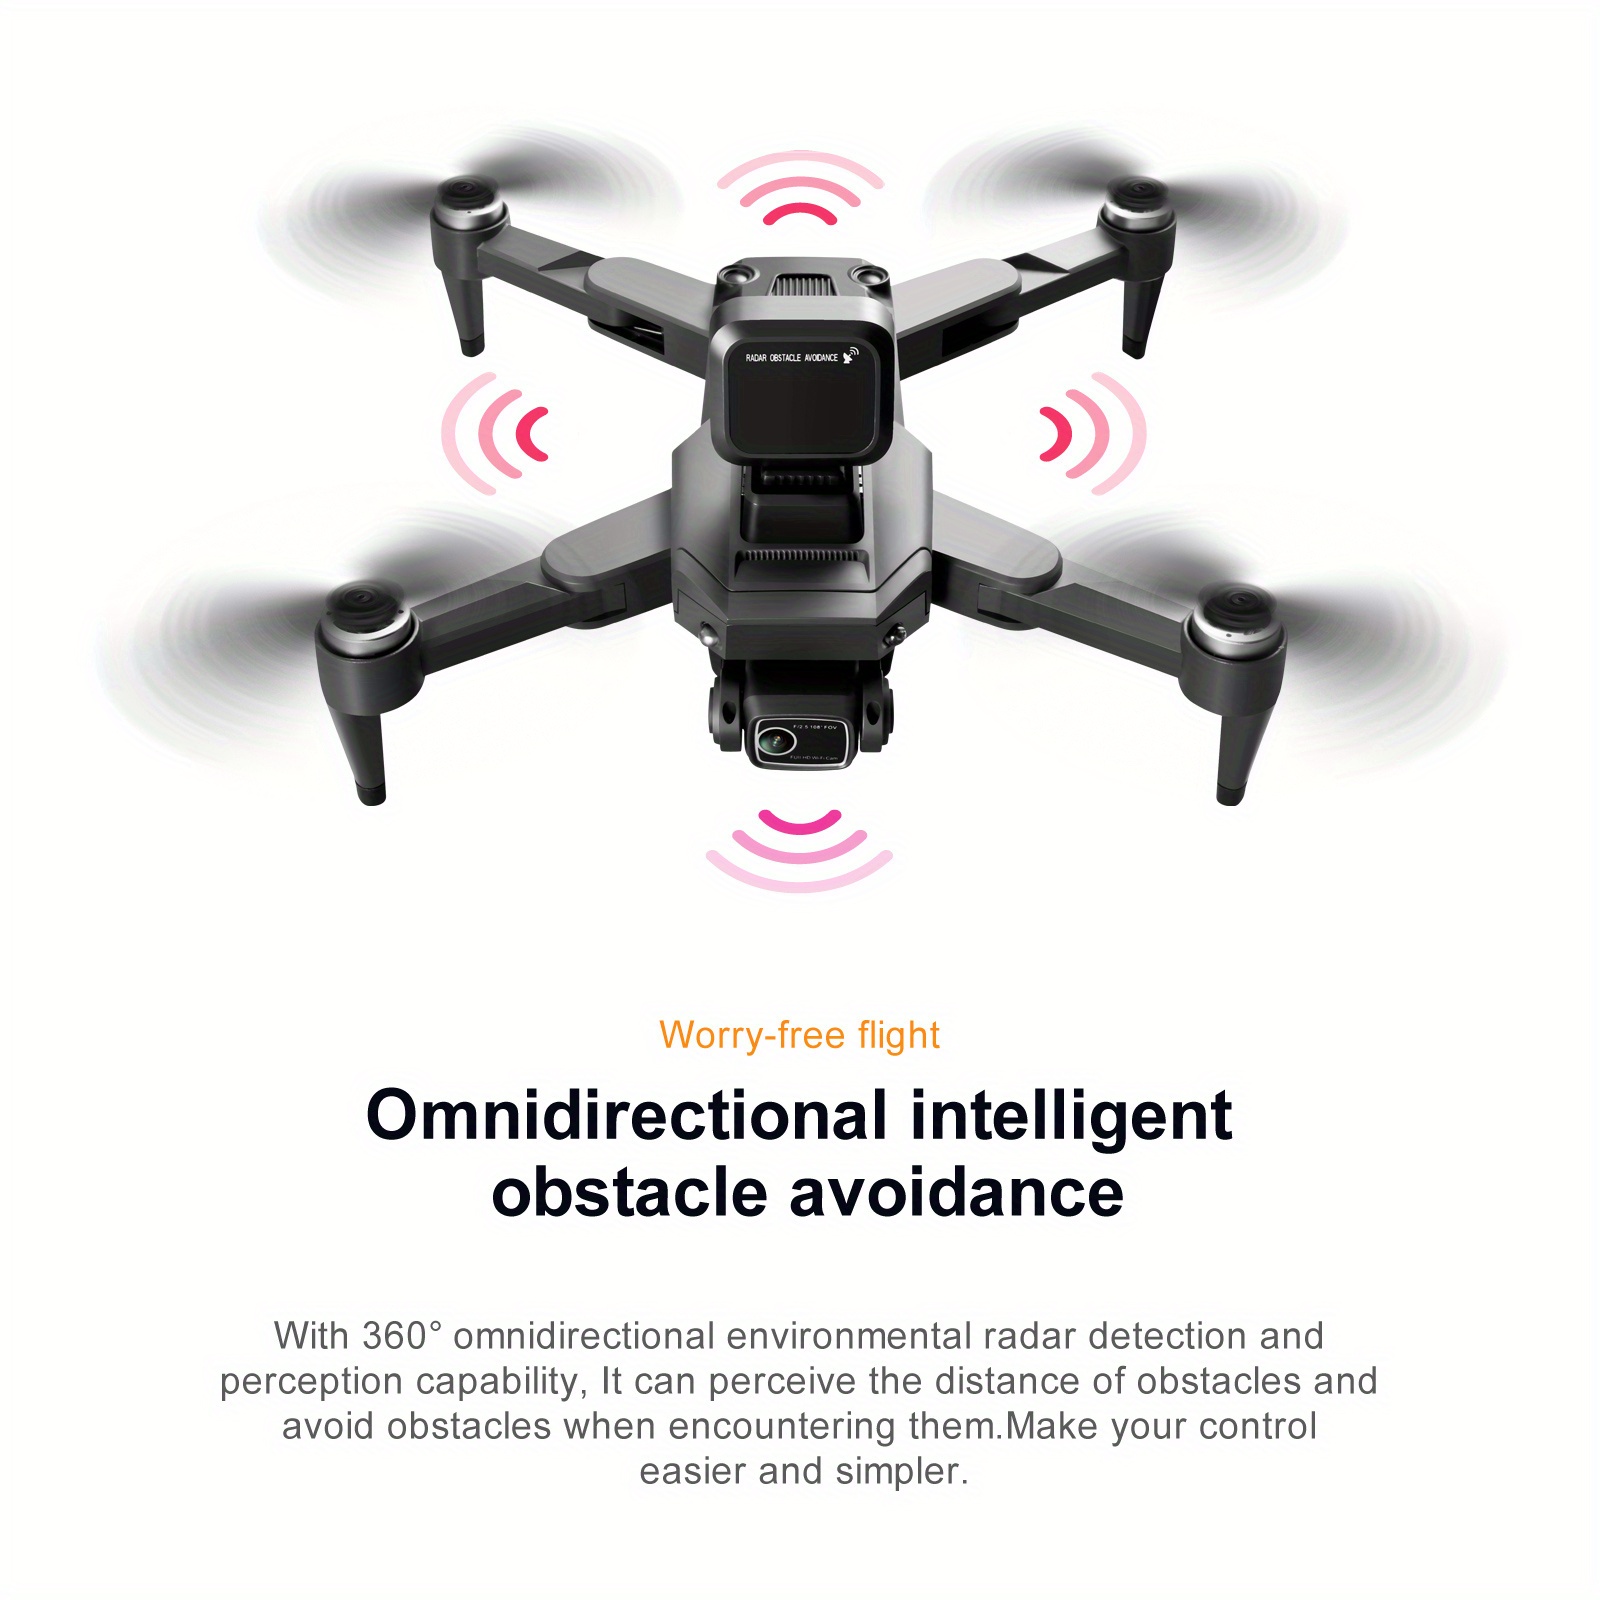 5g gps uav with brushless power 360 radar obstacle avoidance intelligent following high definition aerial camera fly safe smart details 6